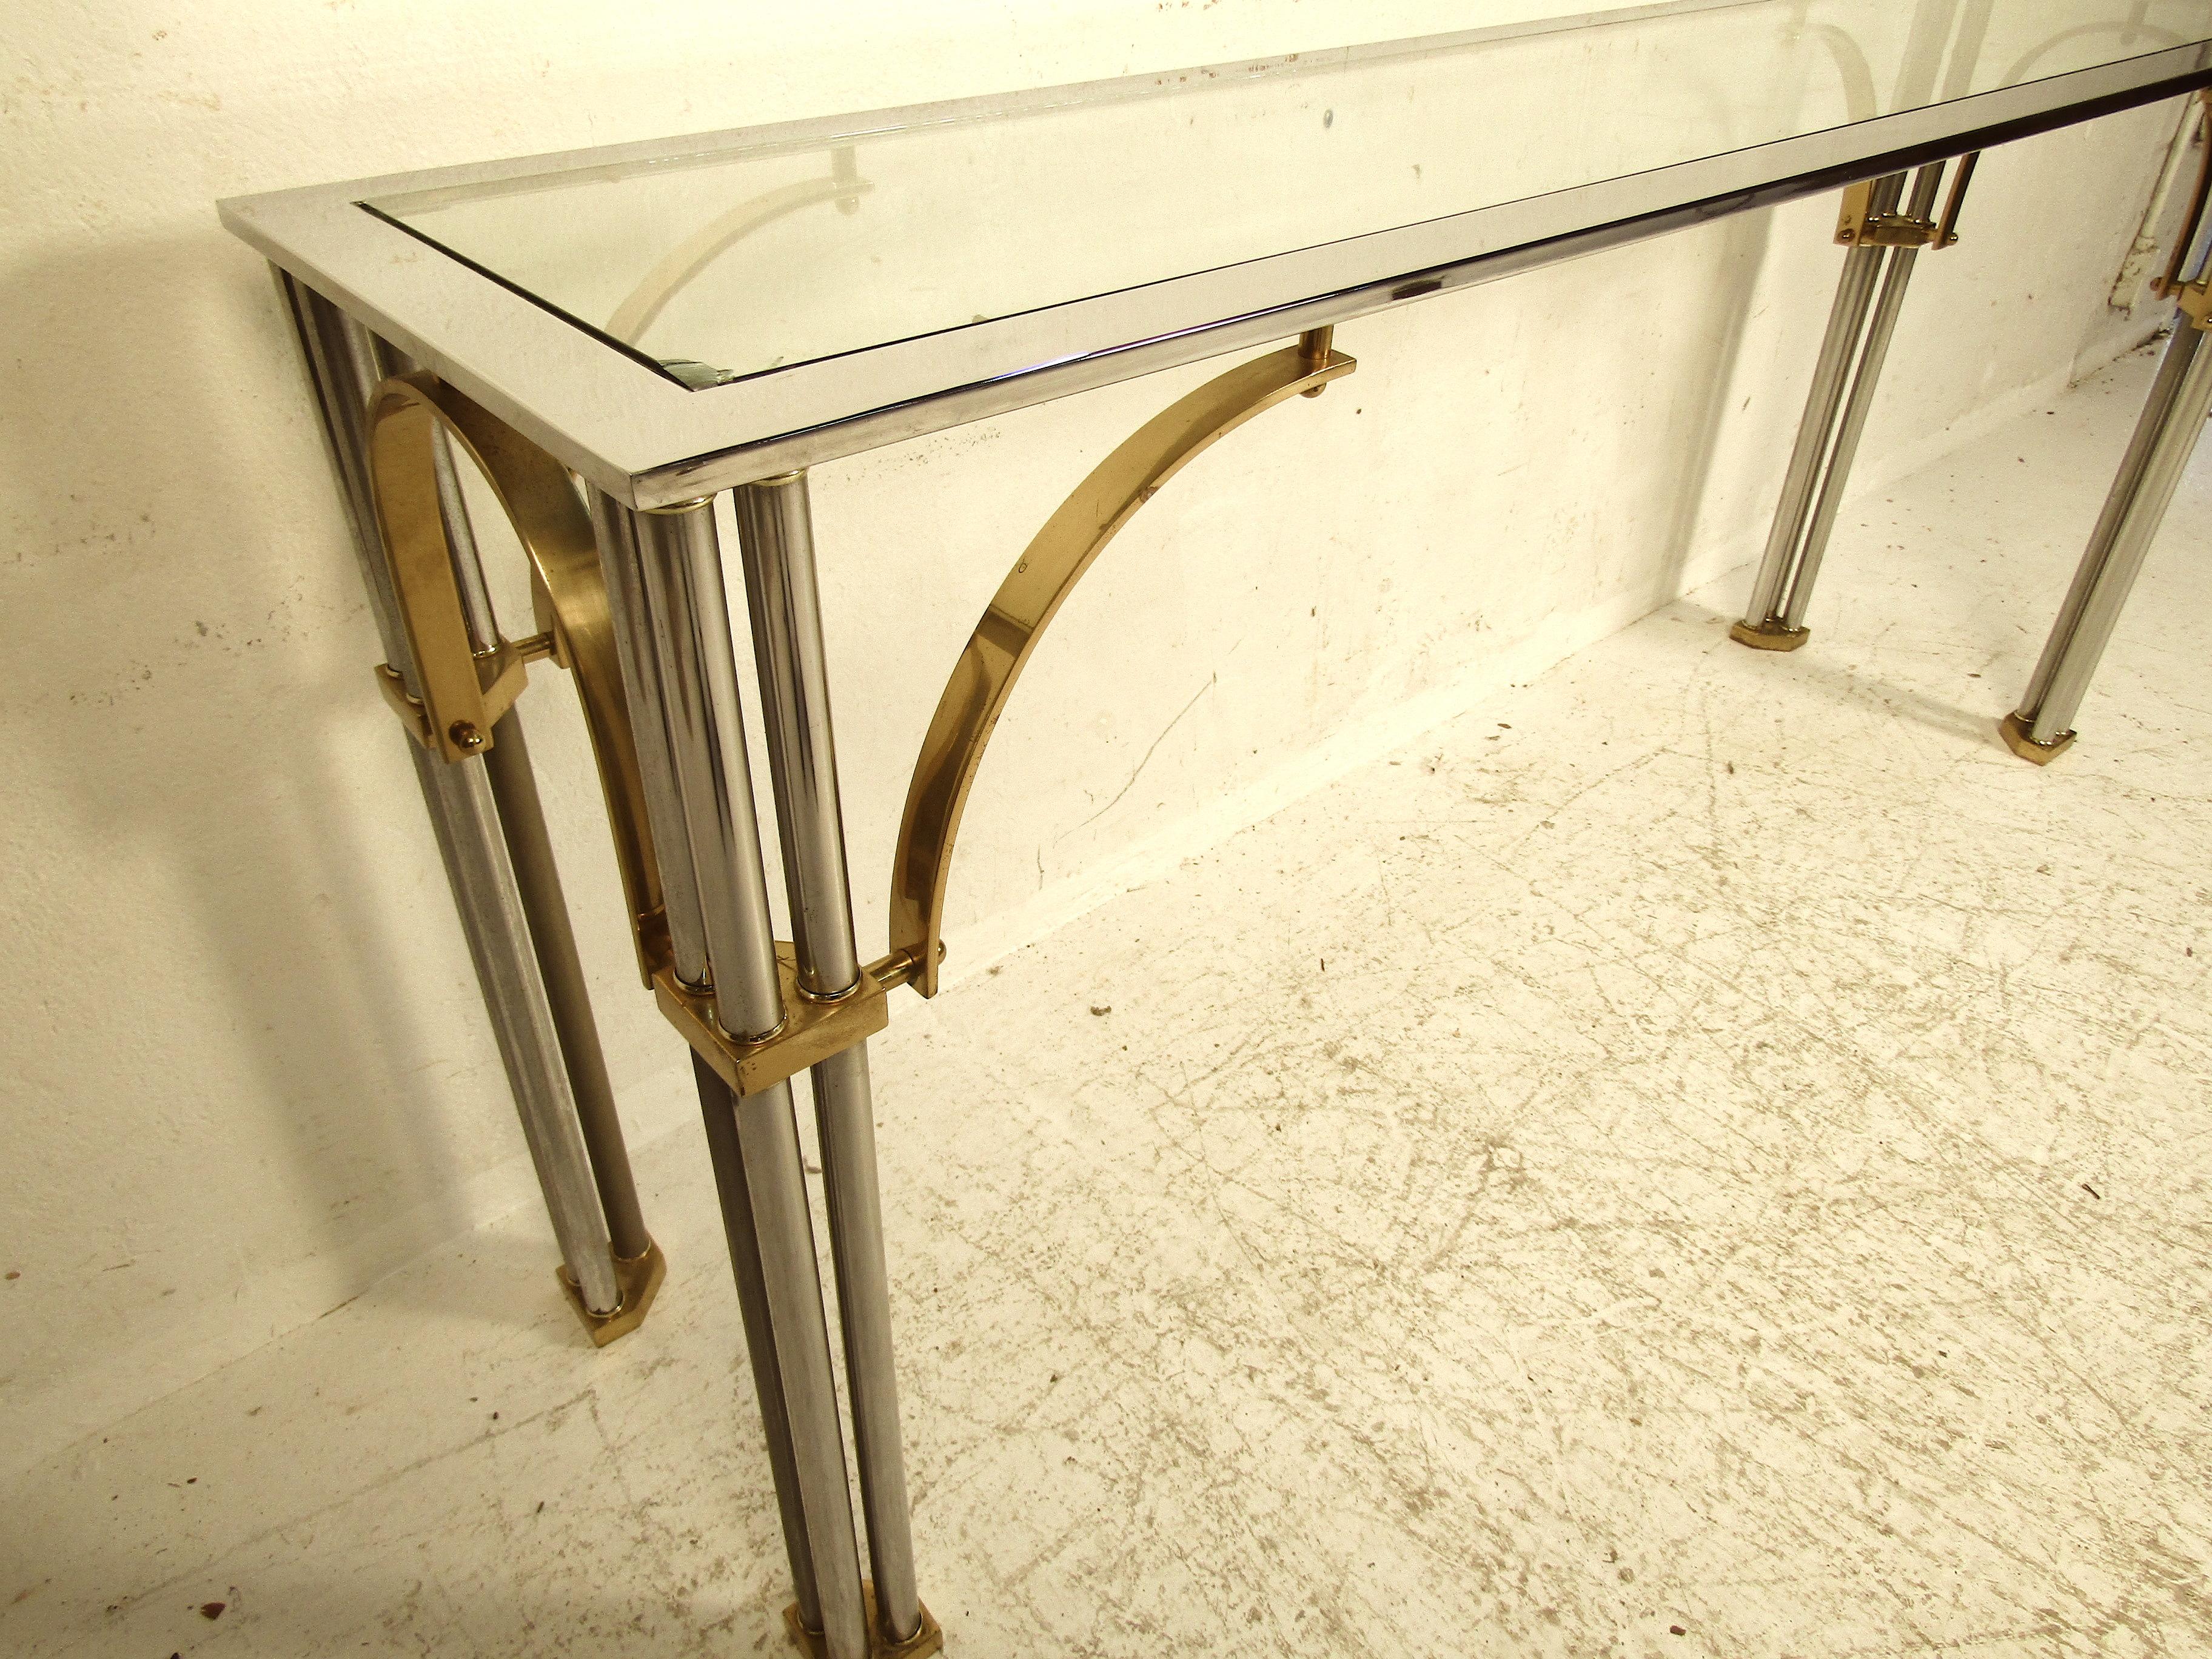 This elegant console table features clean lines and a simplistic style. It would make a great addition to any dining room or party room set up. Sturdy construction and heavy materials would make this a great addition for any high traffic area.